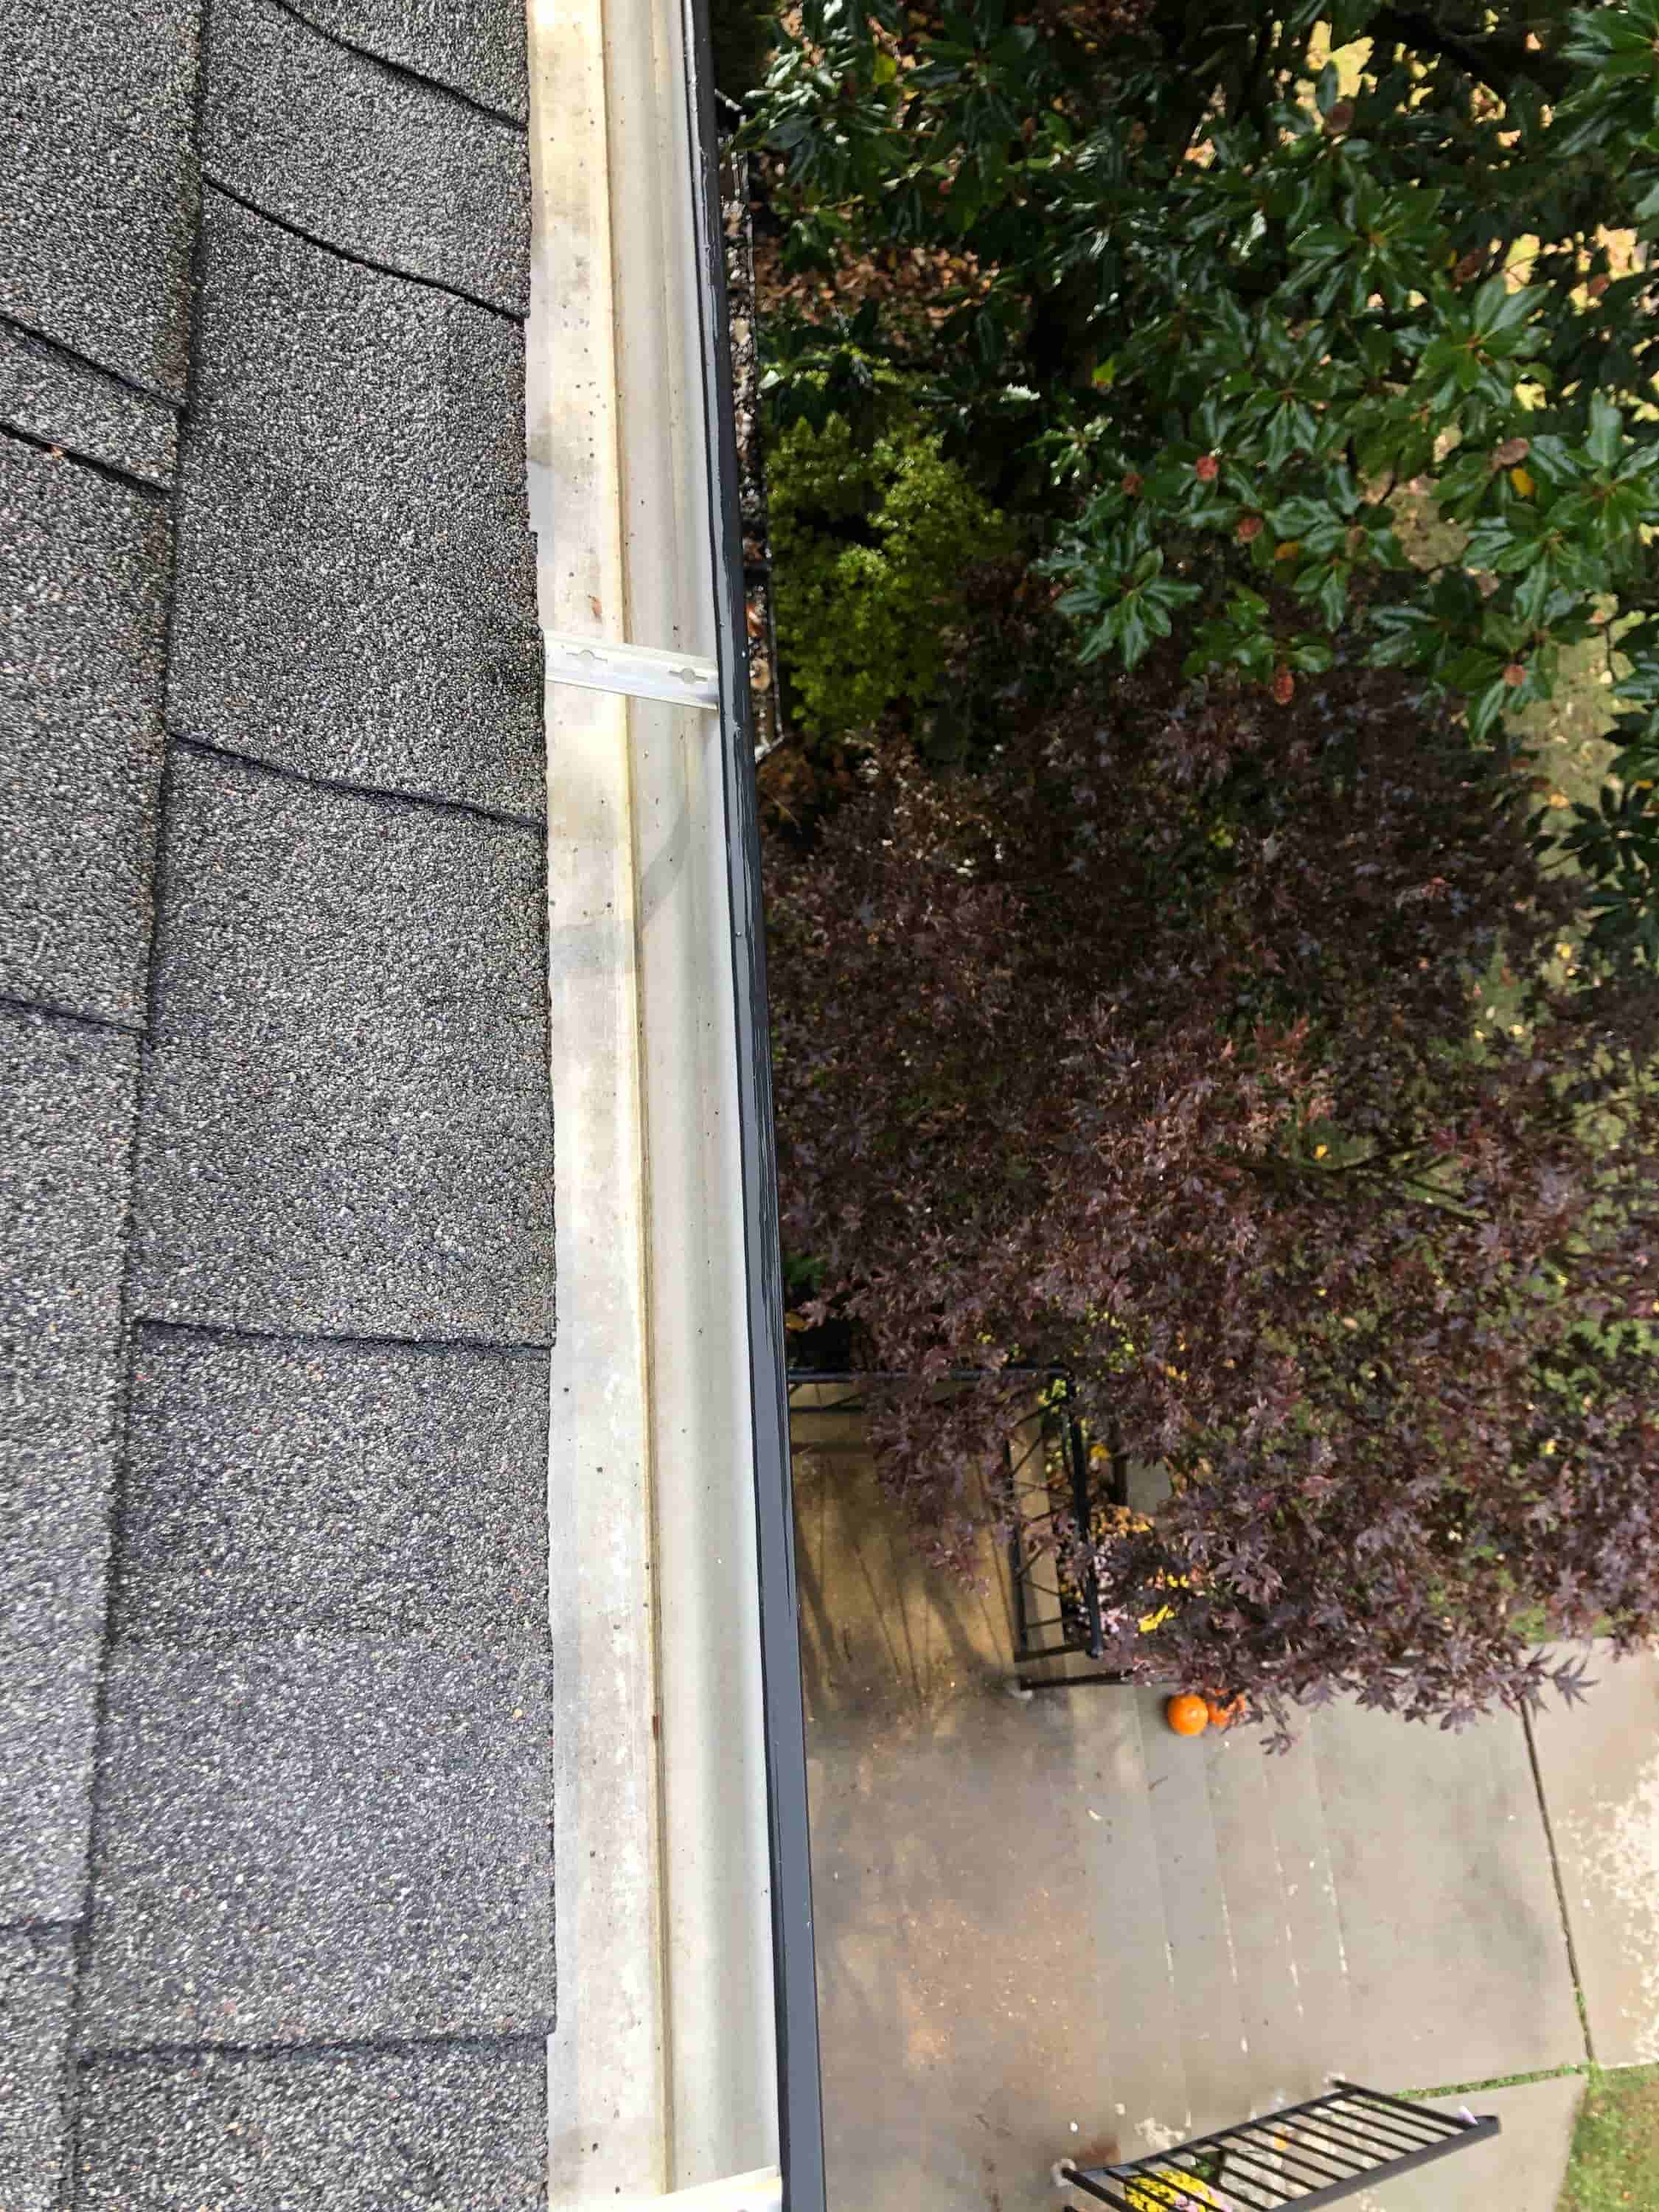 gutter cleaning tools for 2 story house